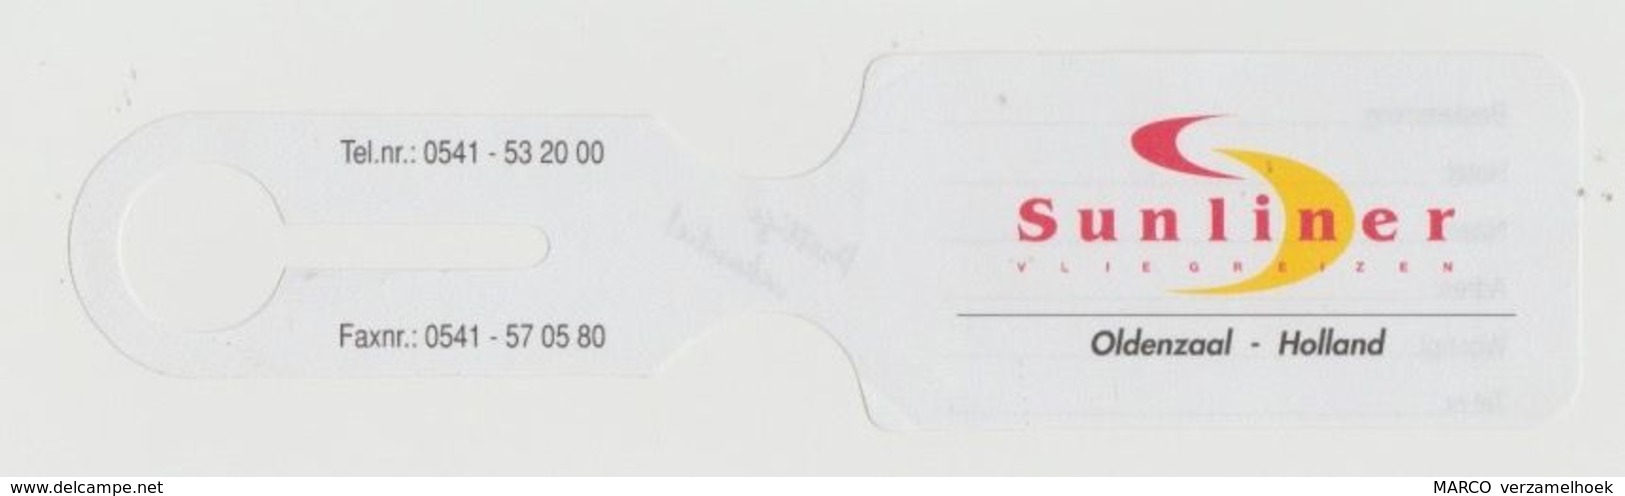 Luggage Tag-kofferlabel Sunliner Vliegreizen Oldenzaal (NL) - Baggage Labels & Tags